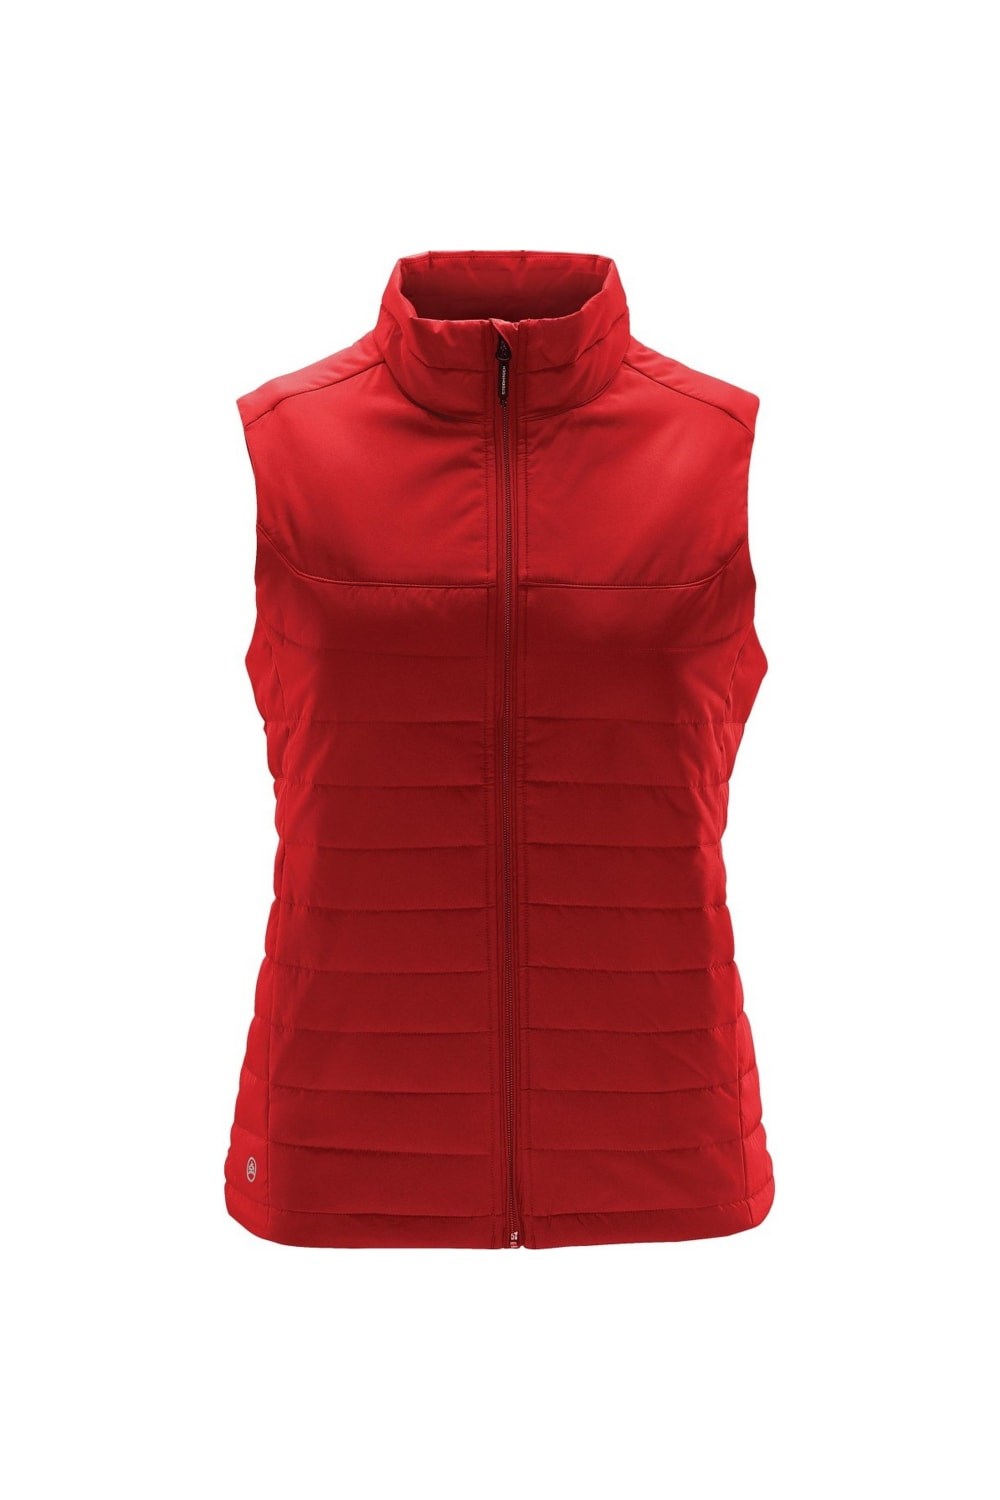 Nautilus Womens Quilted Gilet -